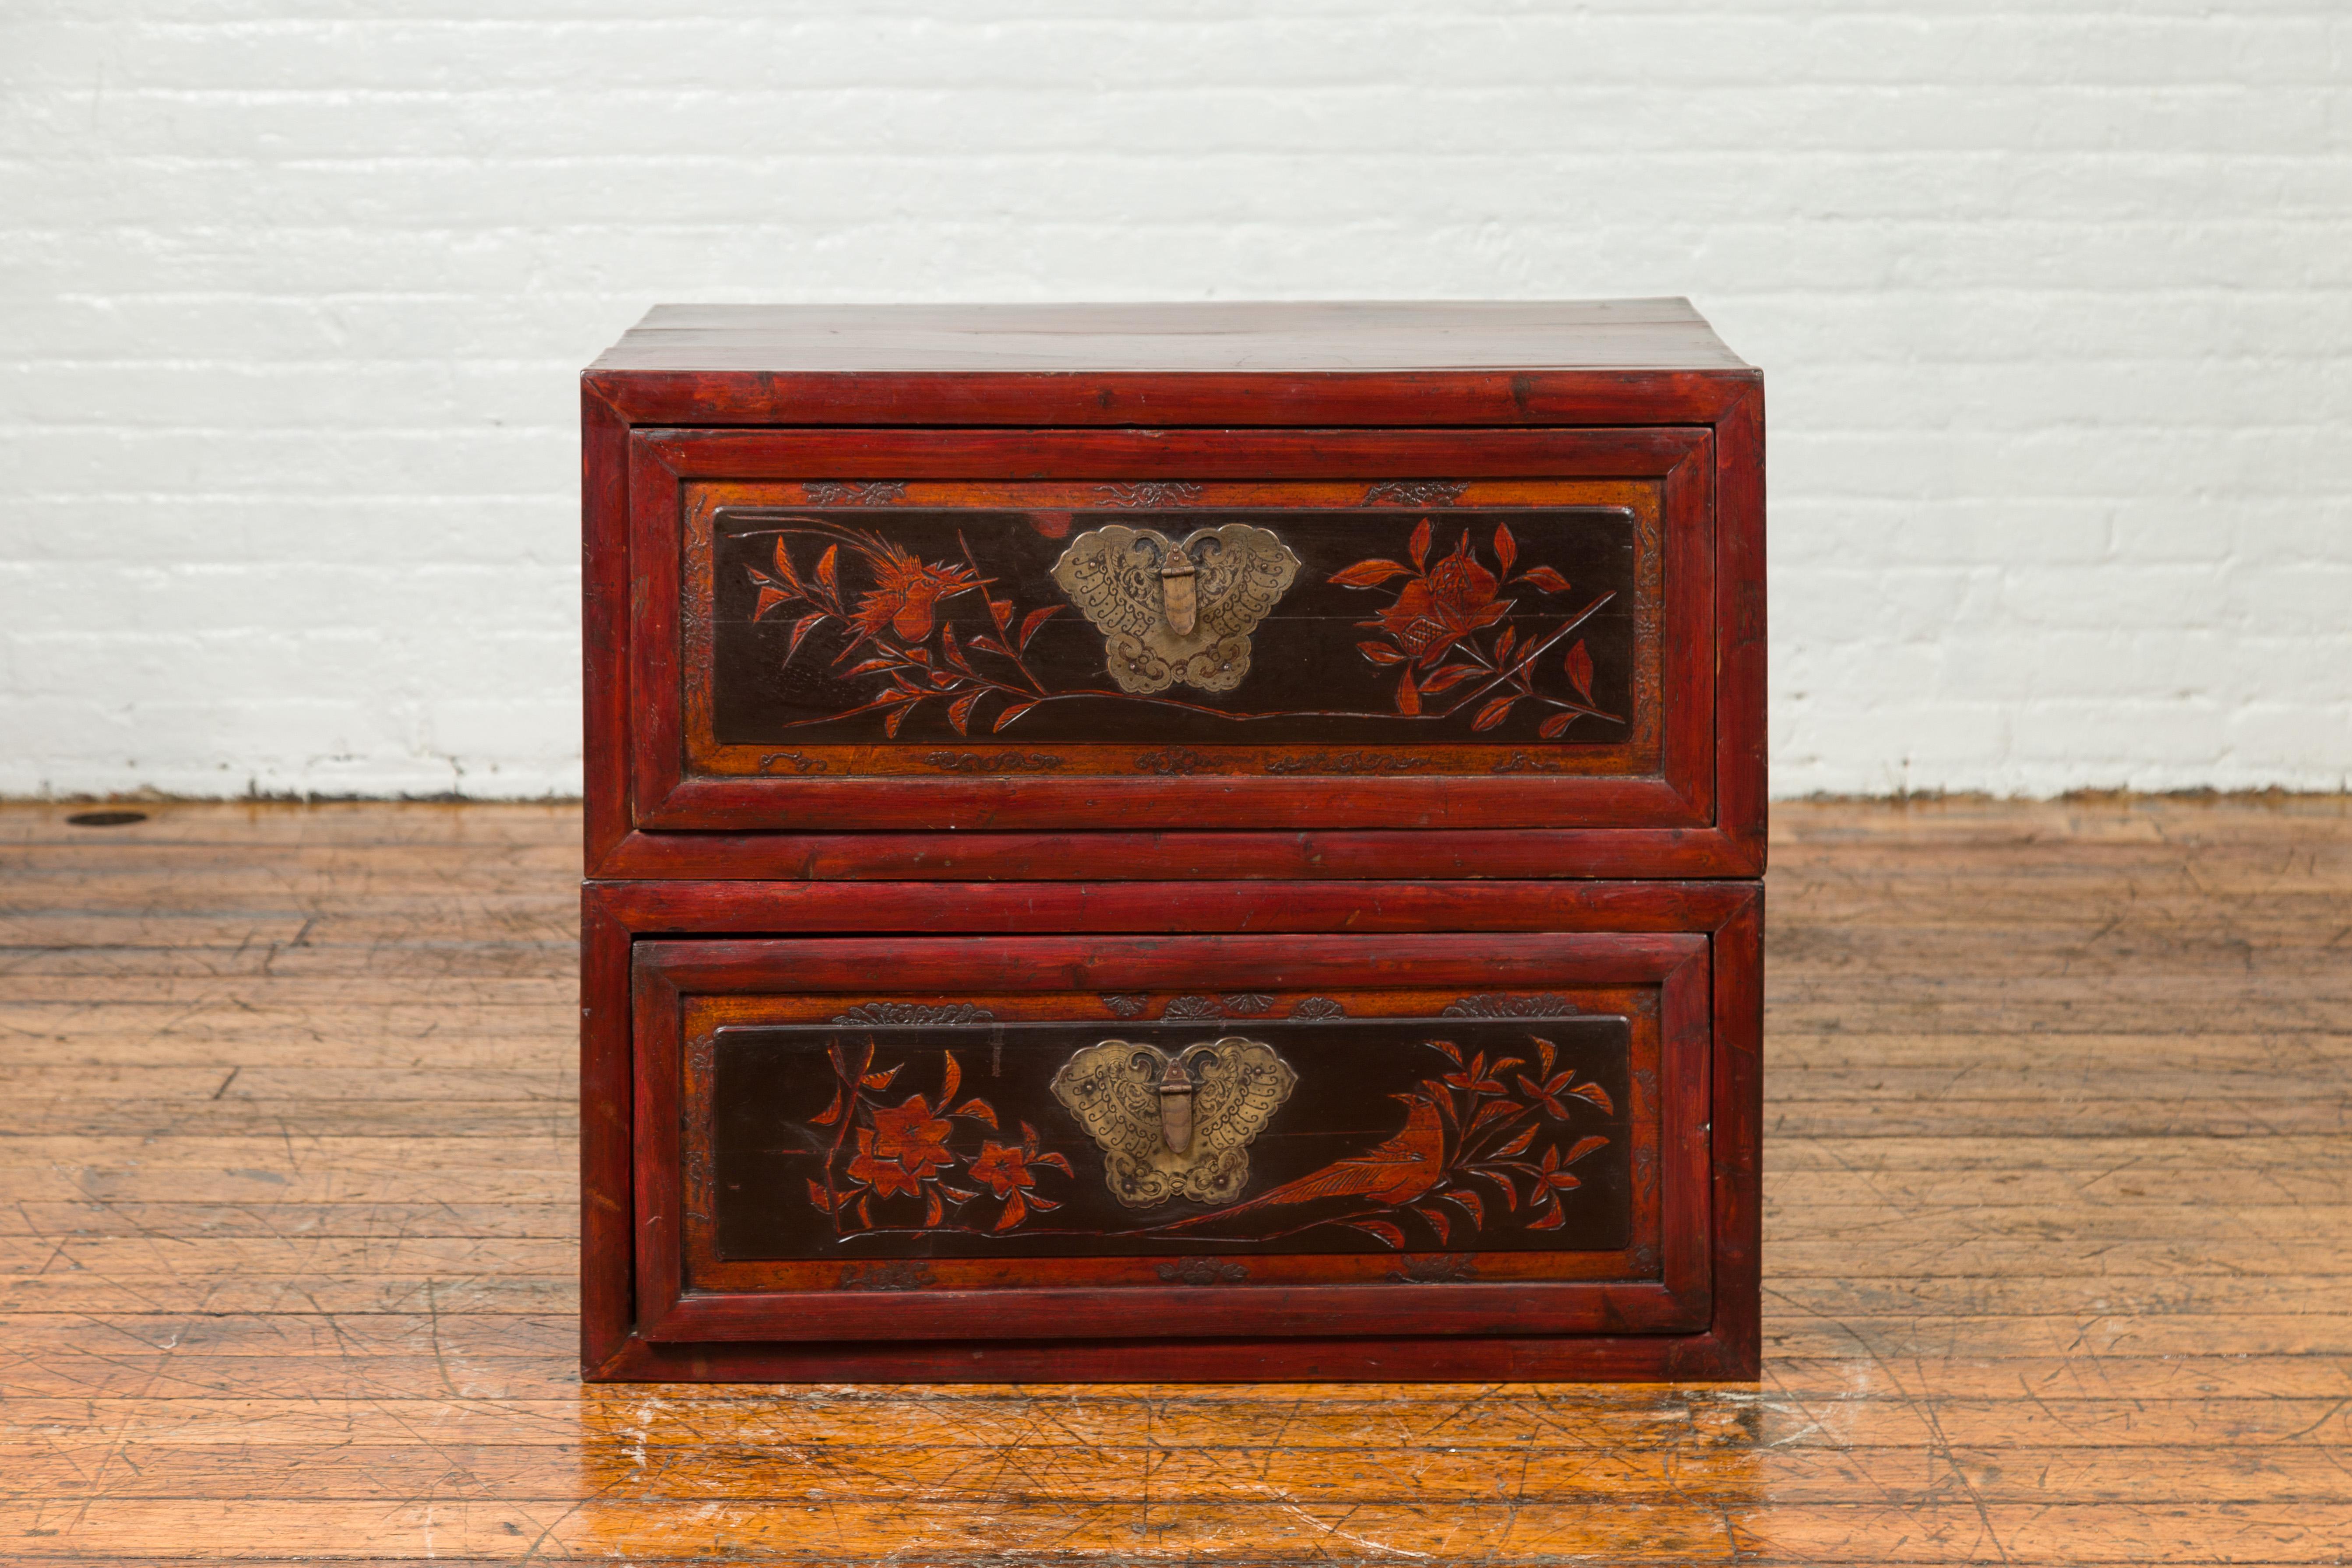 An antique Chinese red and black lacquered two-part storage cabinet with butterfly bronze hardware and carved floral design. Crafted in China, this two-sectioned storage cabinet features a red lacquered body accented with black lacquer on the